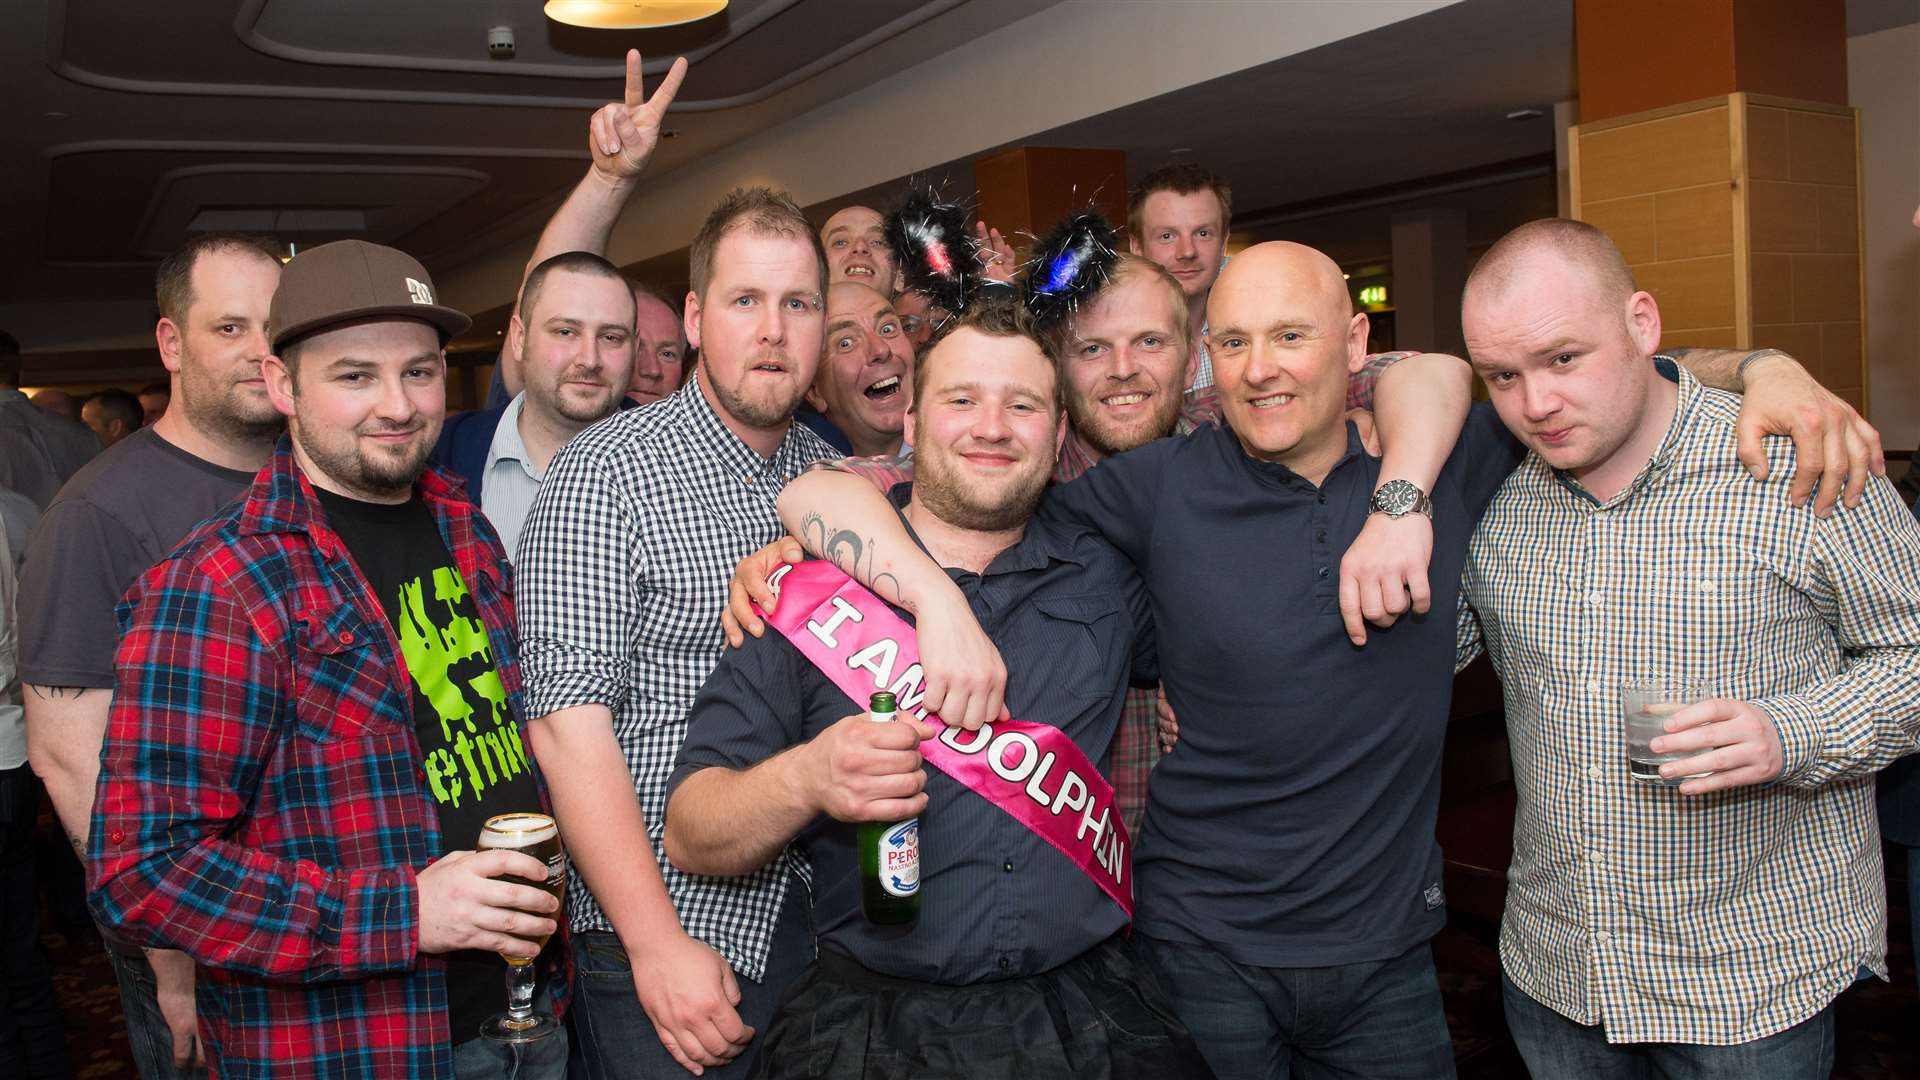 Andrew MacIver (sash) on his stag night in Wetherspoons. Picture: Callum Mackay.